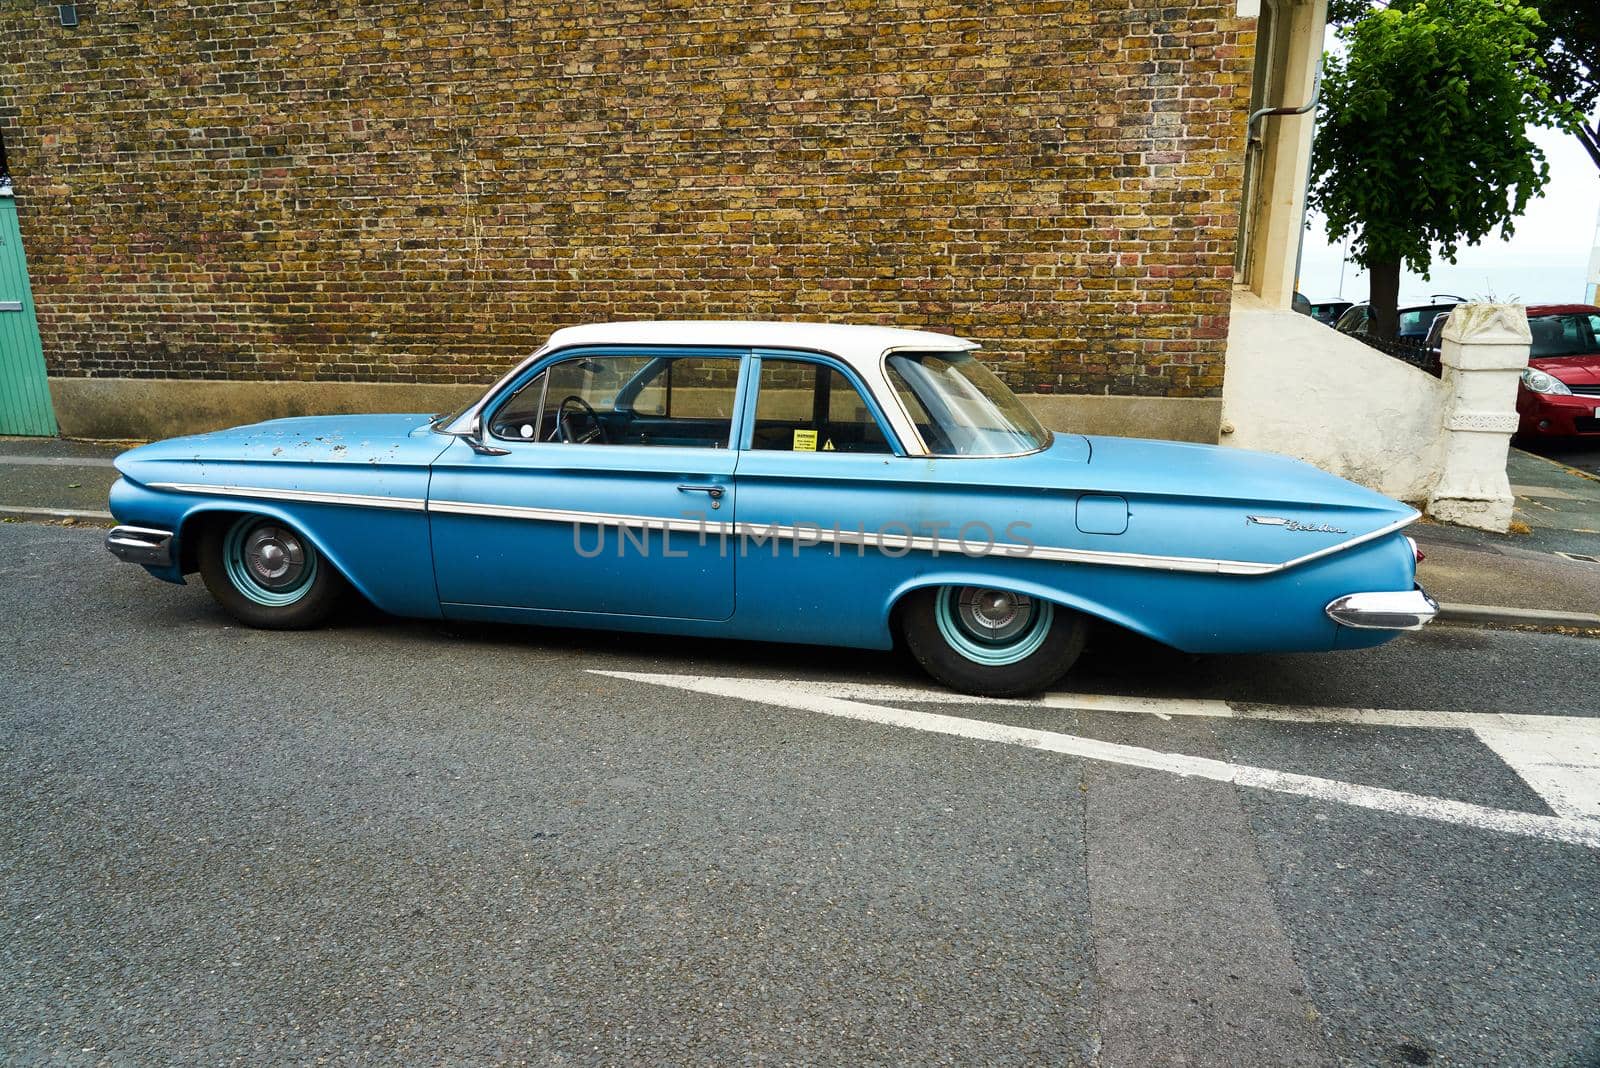 Ramsgate, United Kingdom - June 10, 2021: A Blue 1961 4 door Chevrolet Bel Air from the rear by ChrisWestPhoto